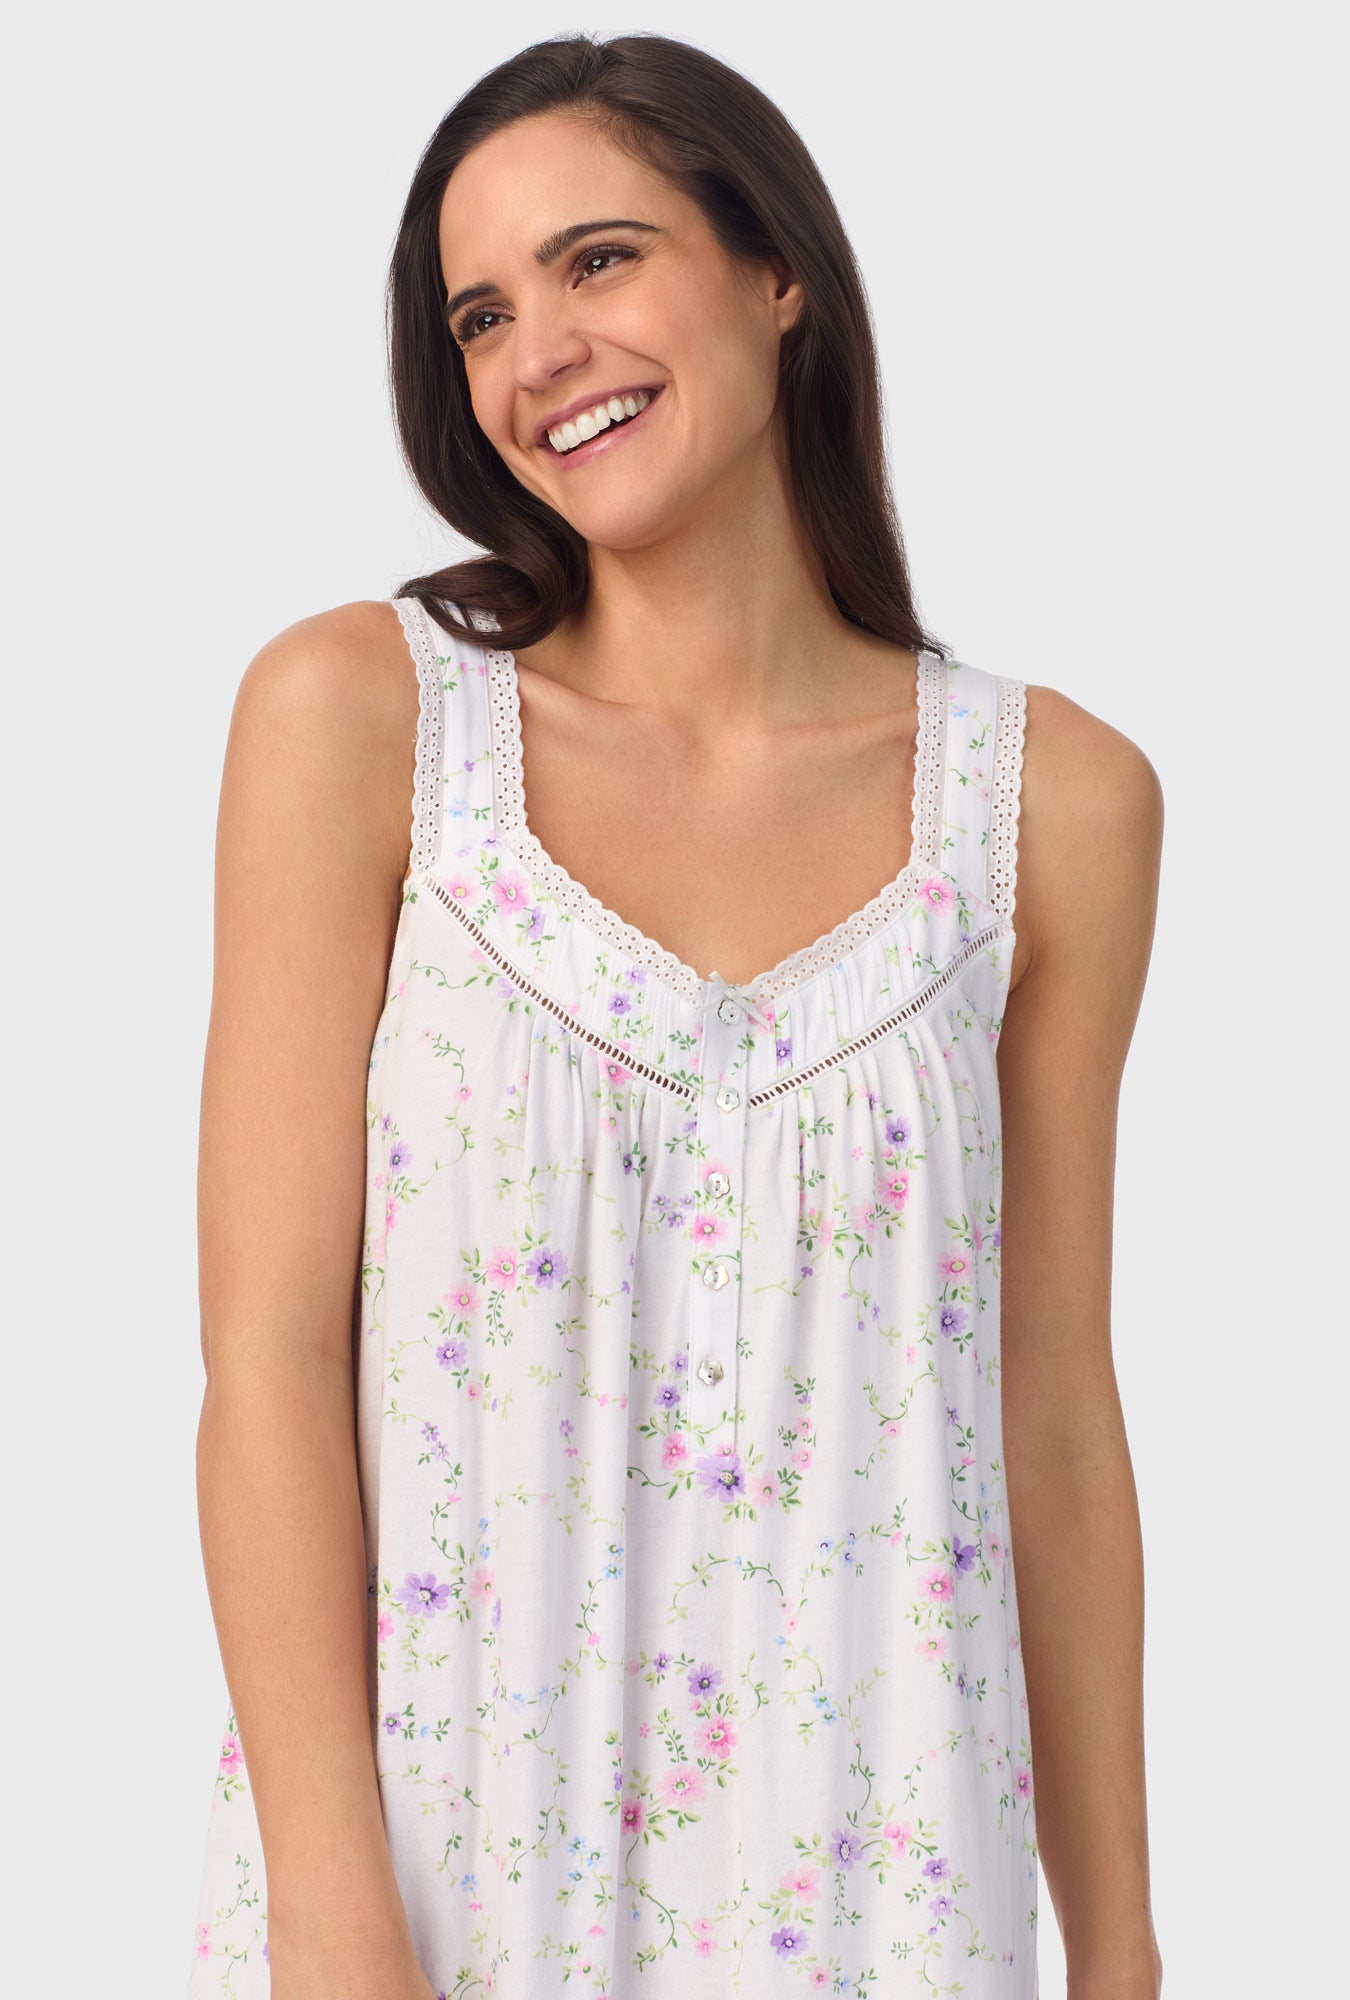 A lady wearing white sleeveless Viney Floral Sleeveless Chemise with Lilac and Cherry Blossom print